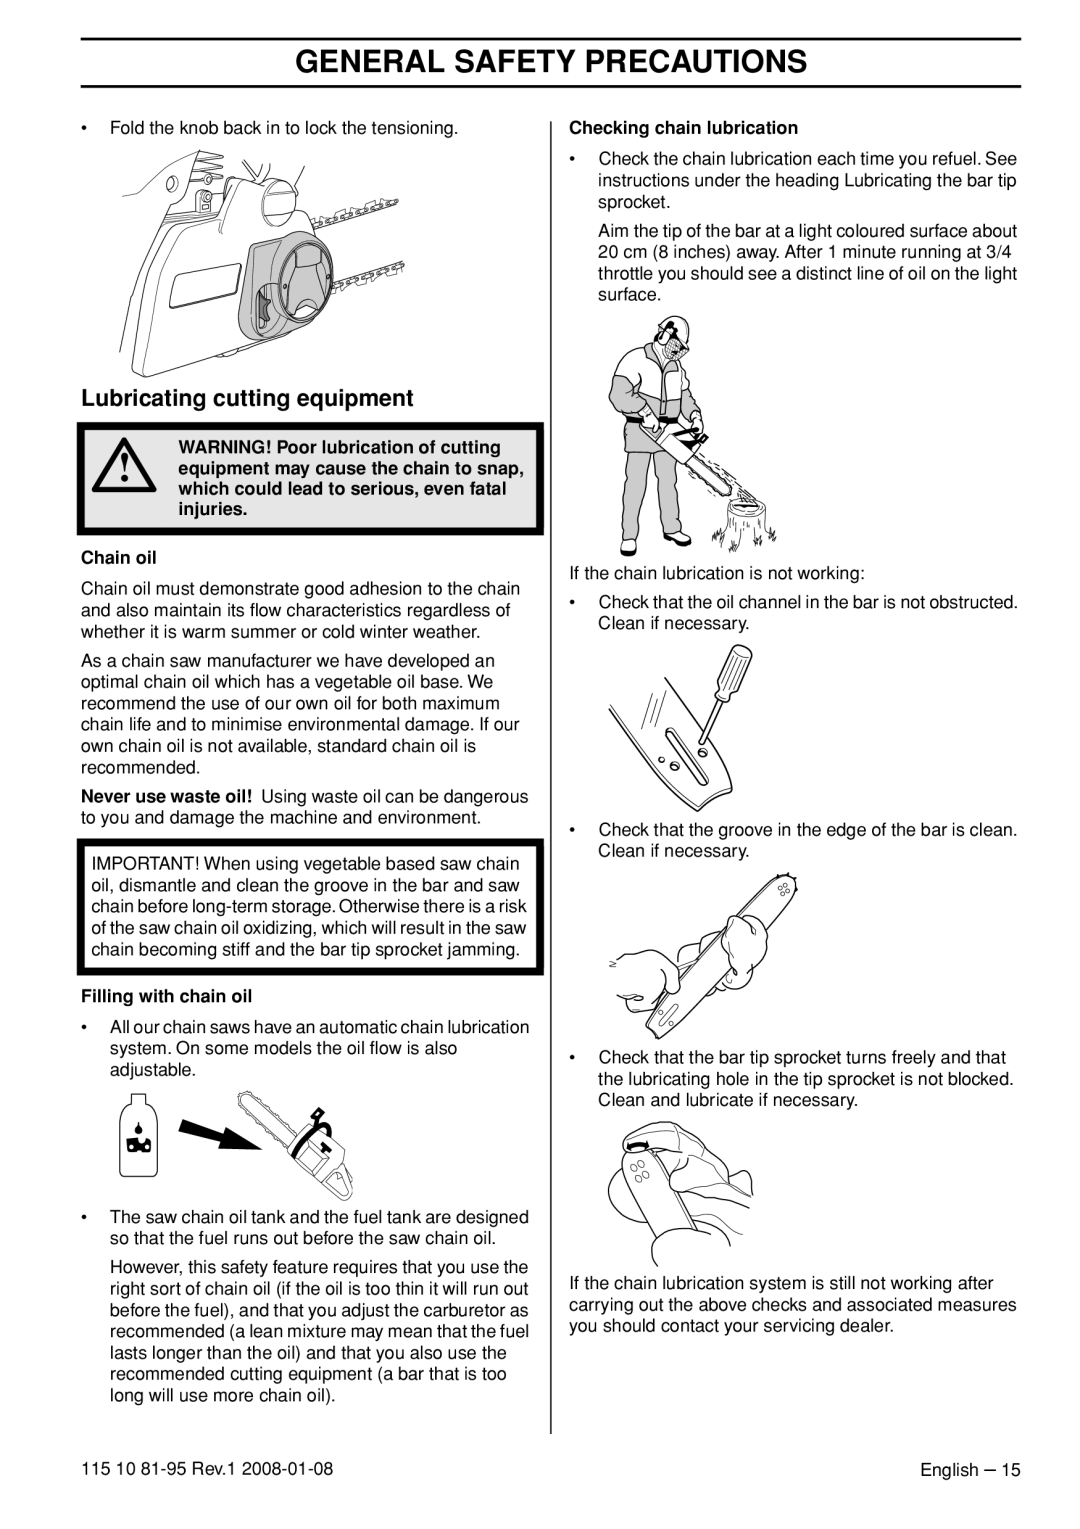 Husqvarna 440e General Safety Precautions, Lubricating cutting equipment, WARNING! Poor lubrication of cutting, Chain oil 